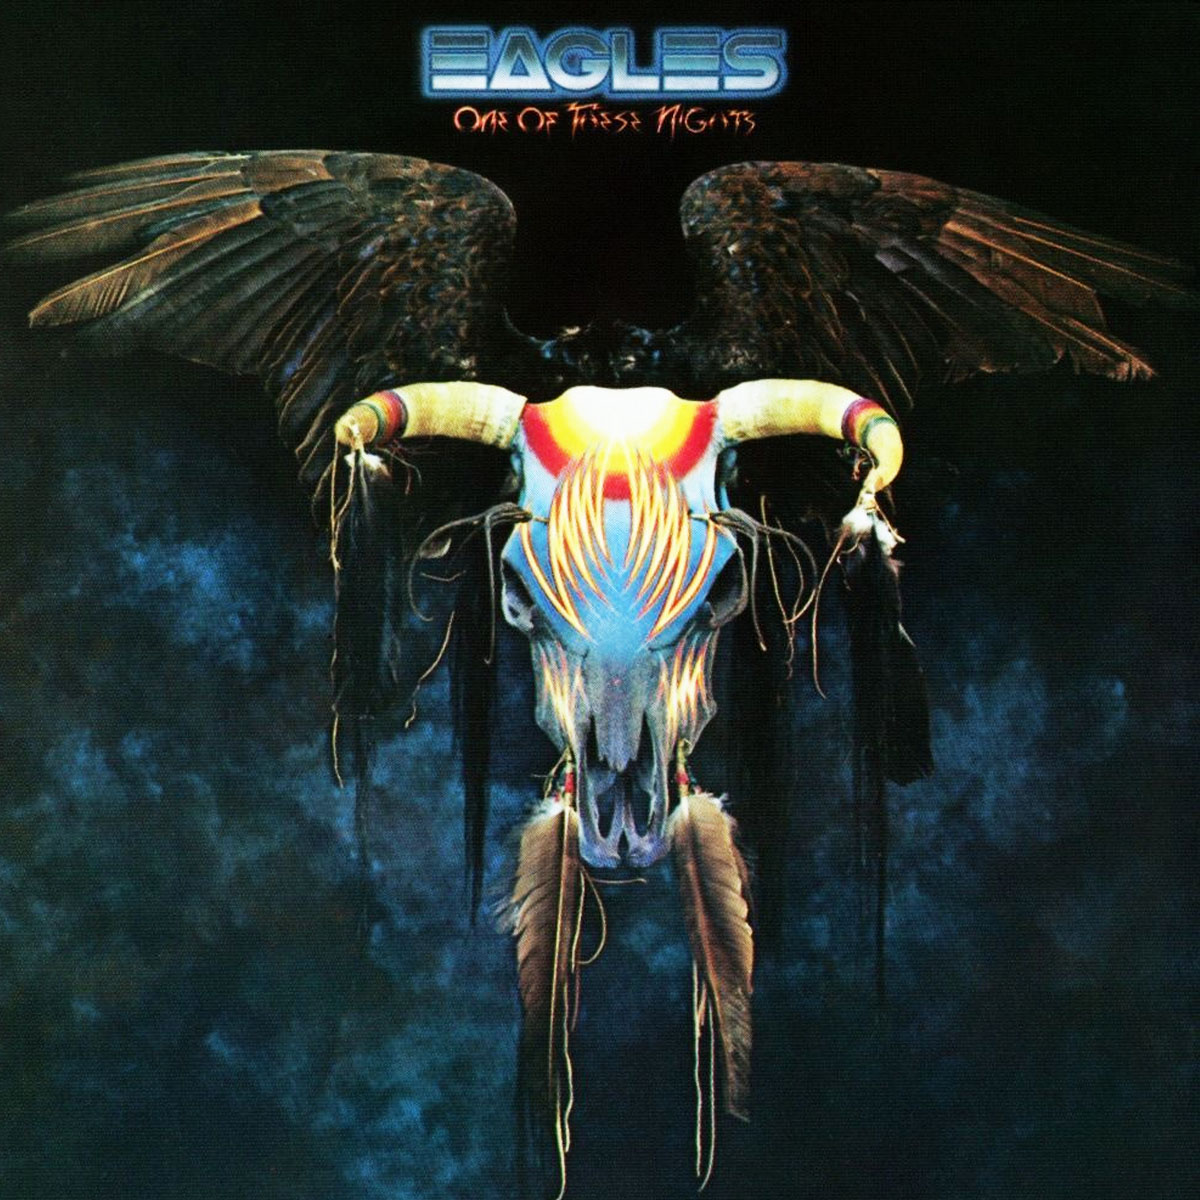 Album "One of These Nights" (1975) by The Eagles